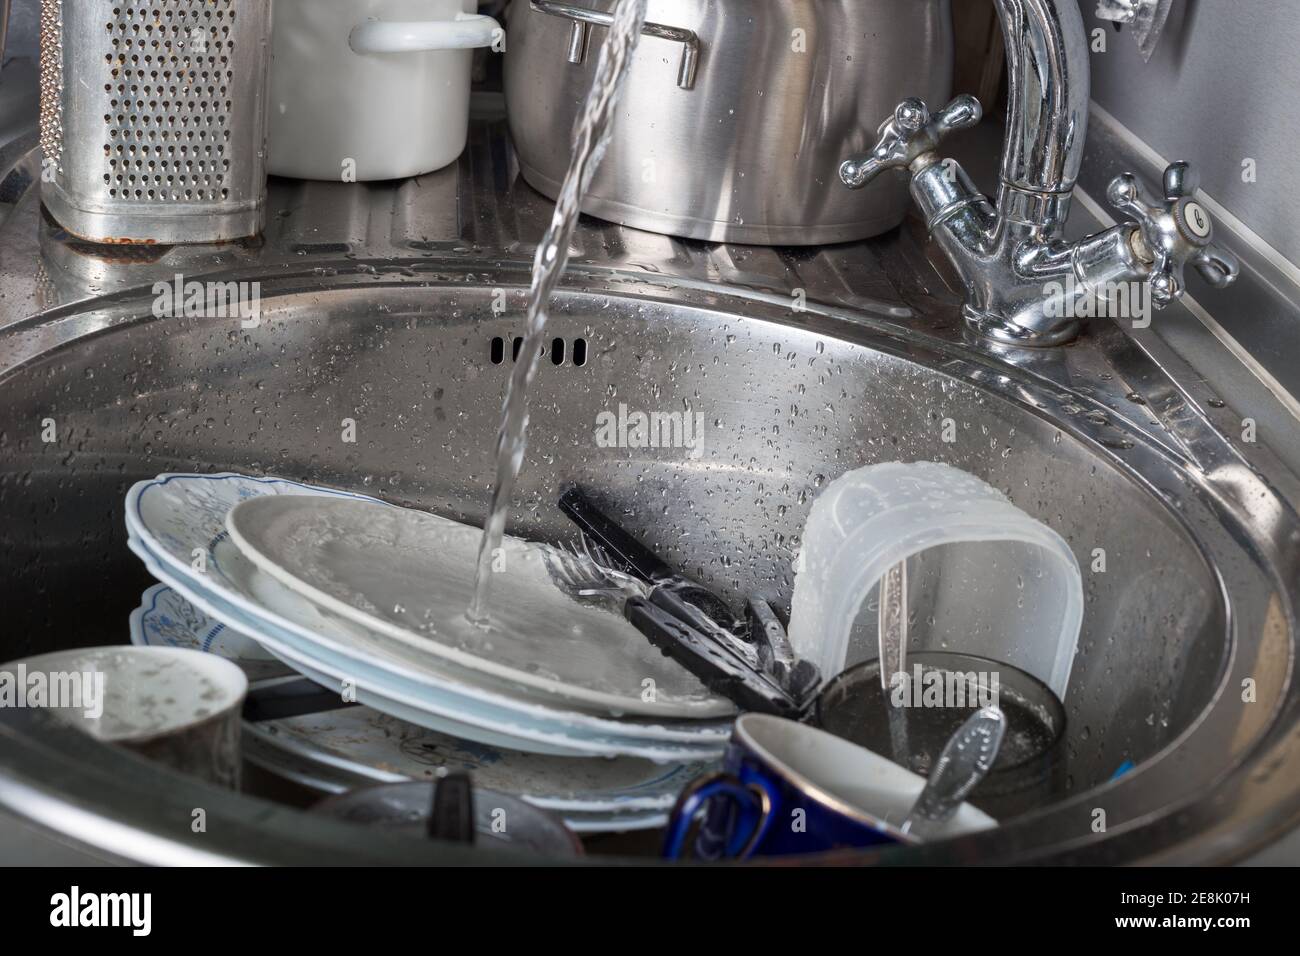 Unwashed dishes and utensils in kitchen sink Stock Photo